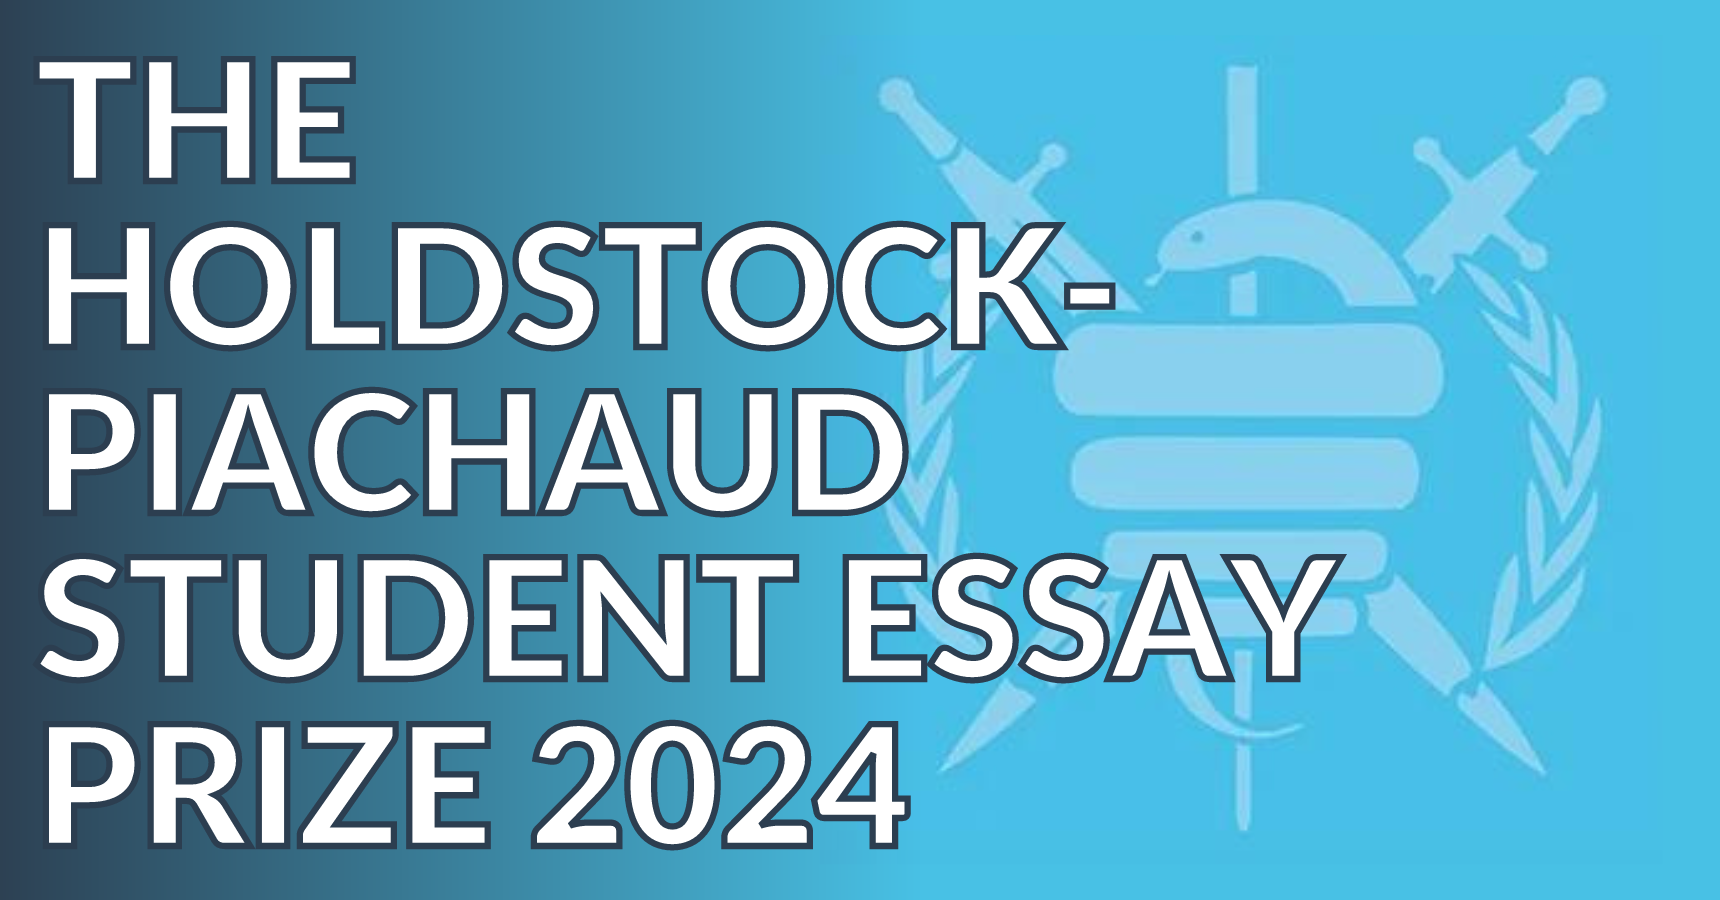 The 2024 Holdstock-Piachaud Student Essay Prize